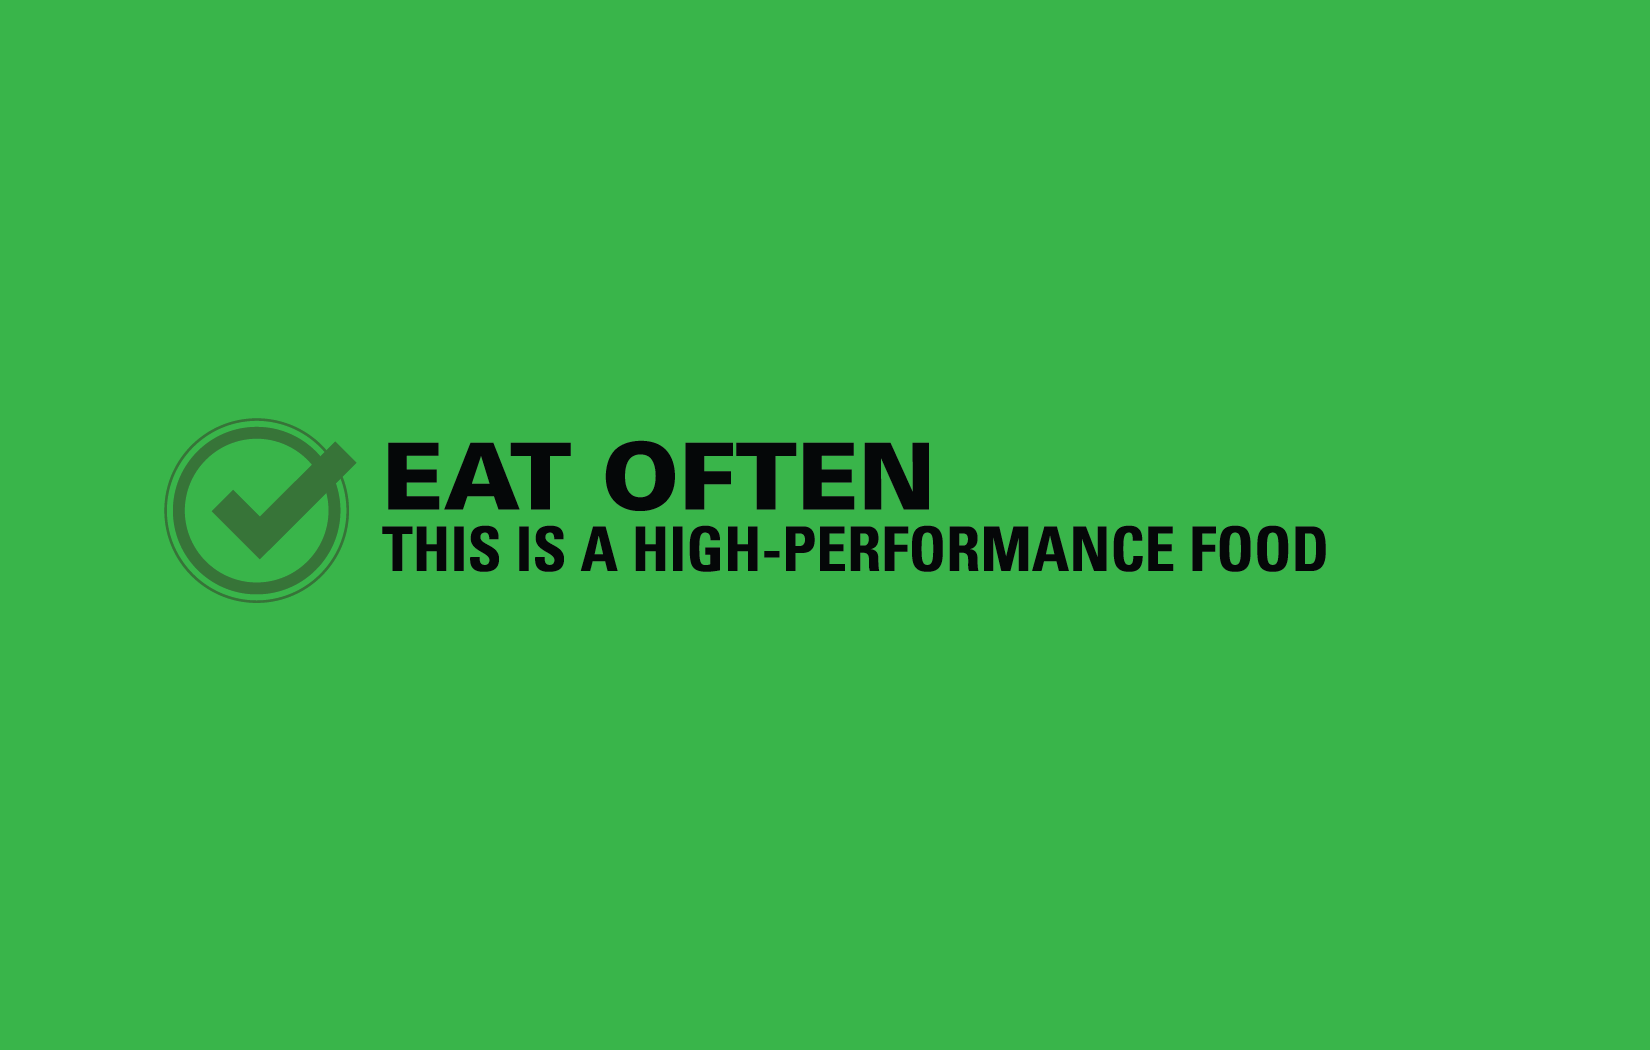 Green checkmark symbol. Eat often. This is a high-performance food.